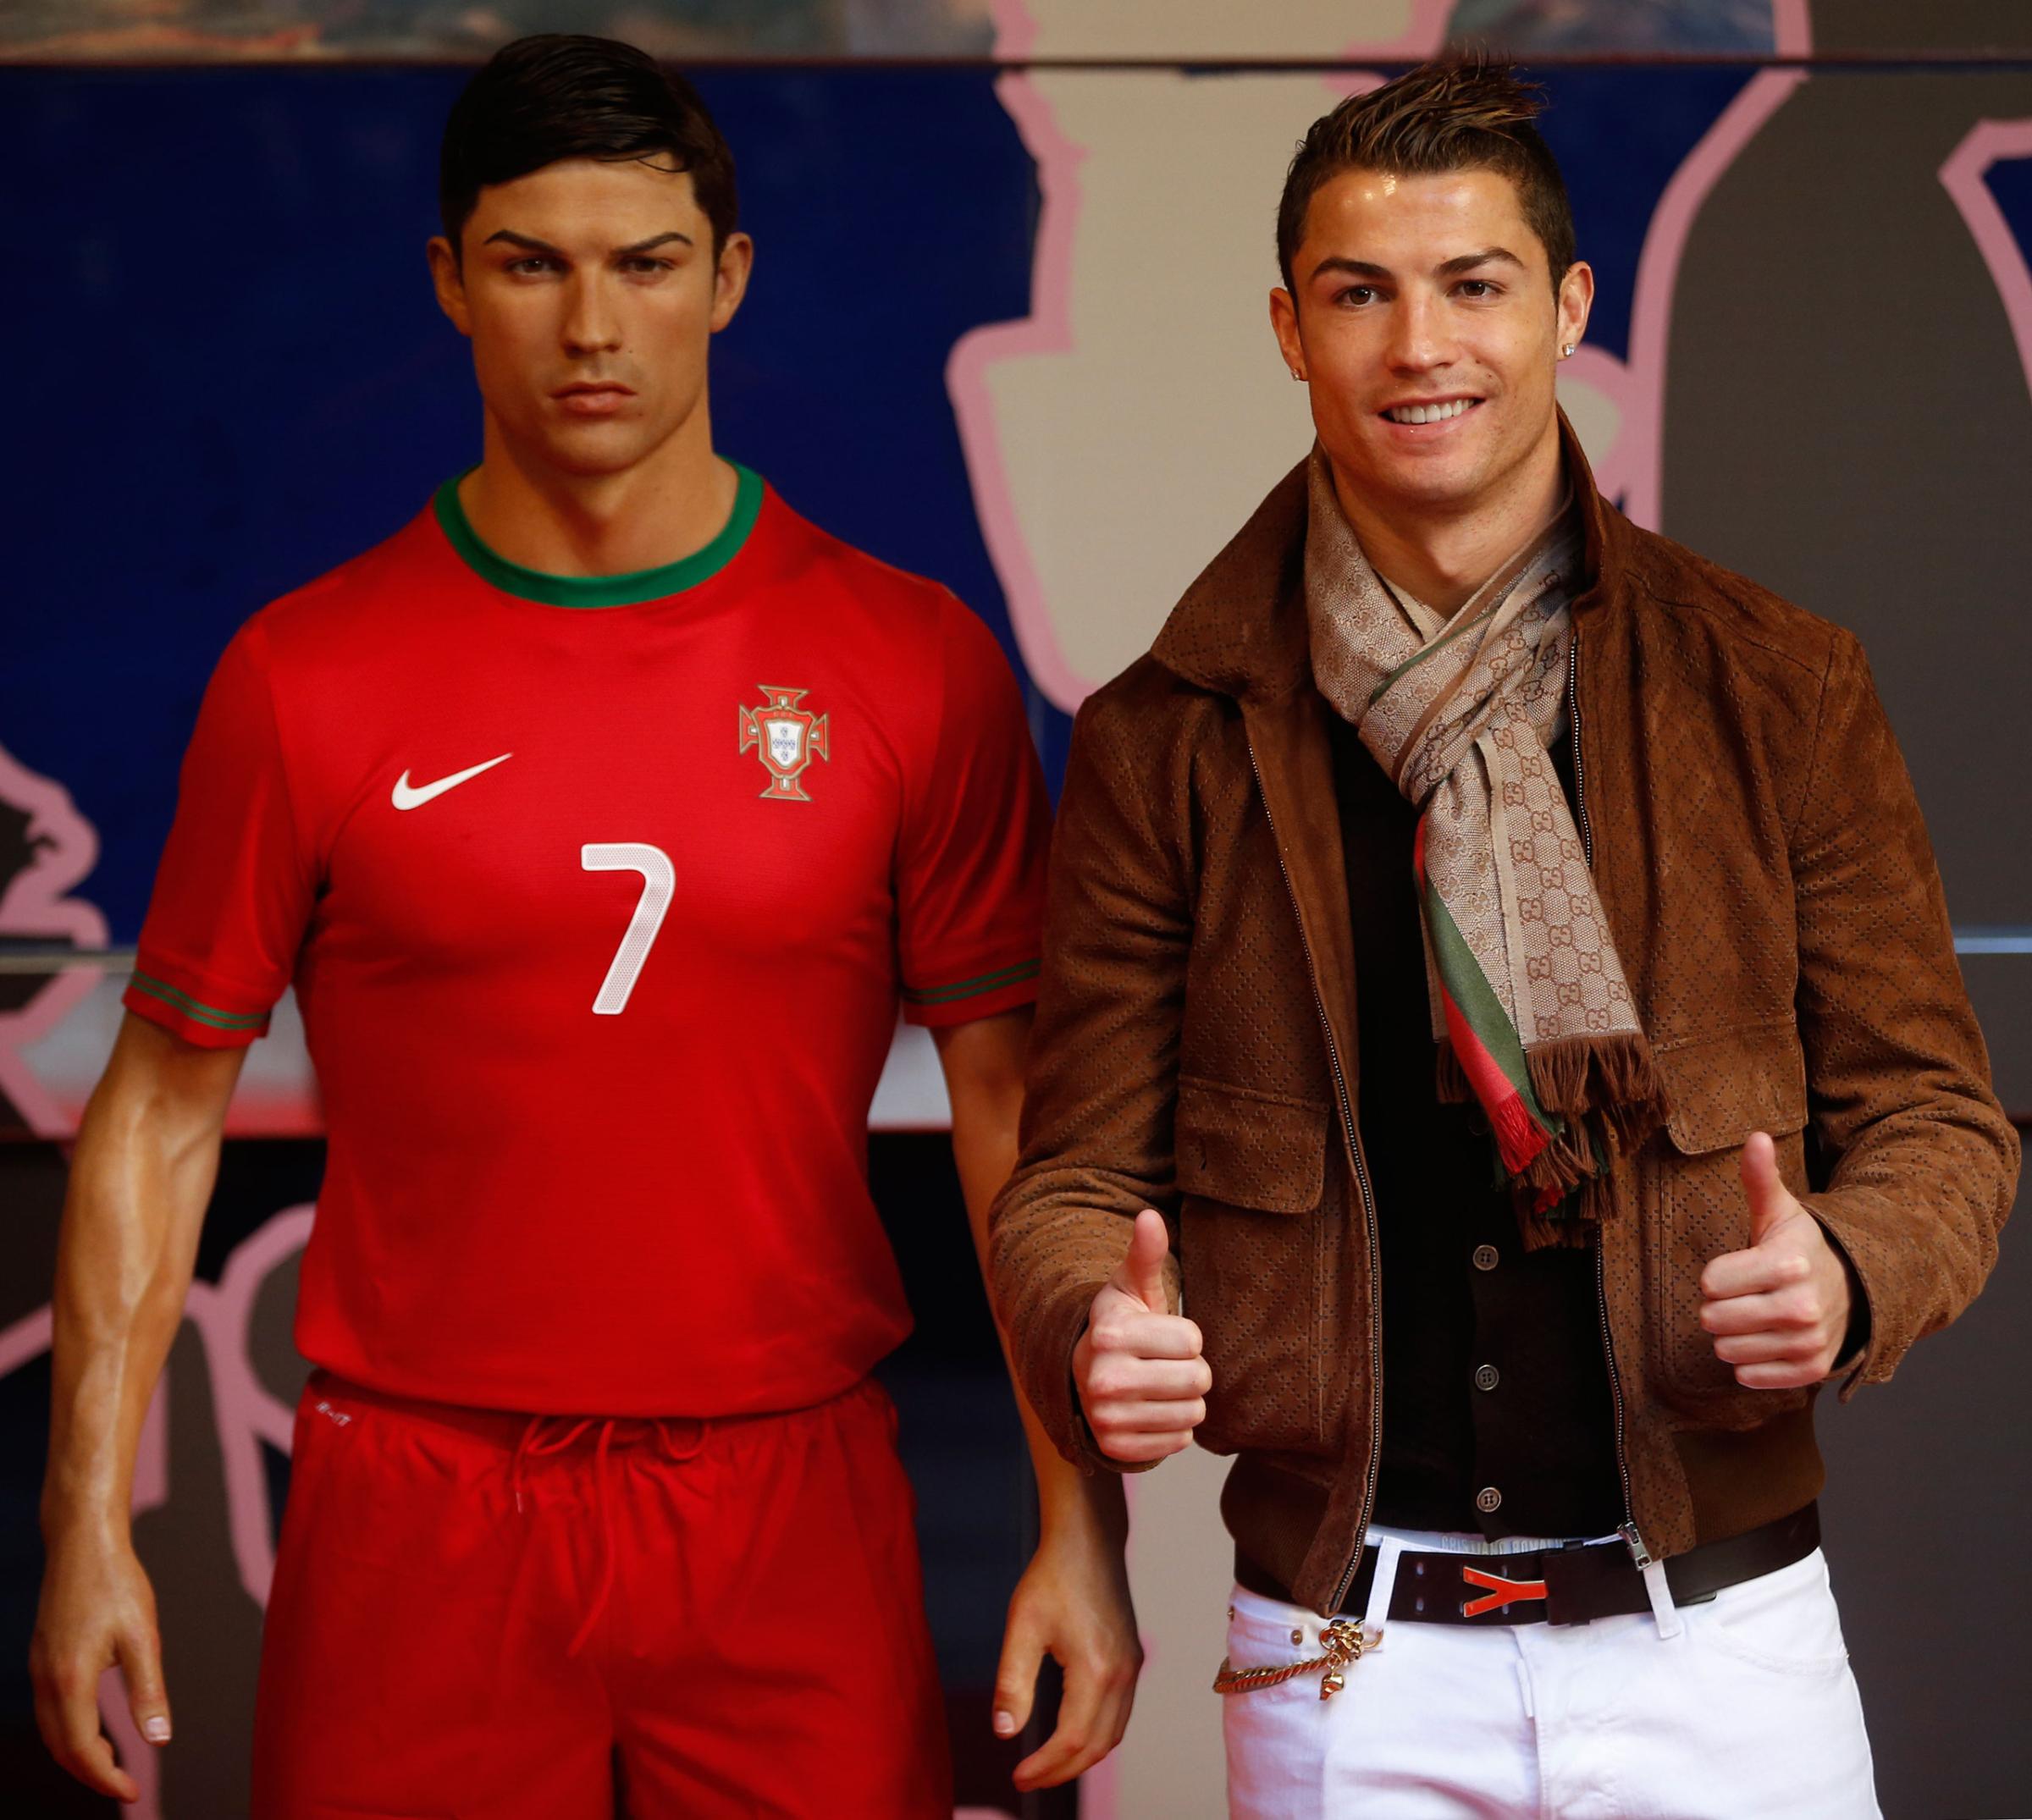 Cristiano Ronaldo, who plays for Real Madrid and Portugal's national soccer team, poses with his wax statue after an unveiling ceremony at the Madrid Wax Museum, in Madrid